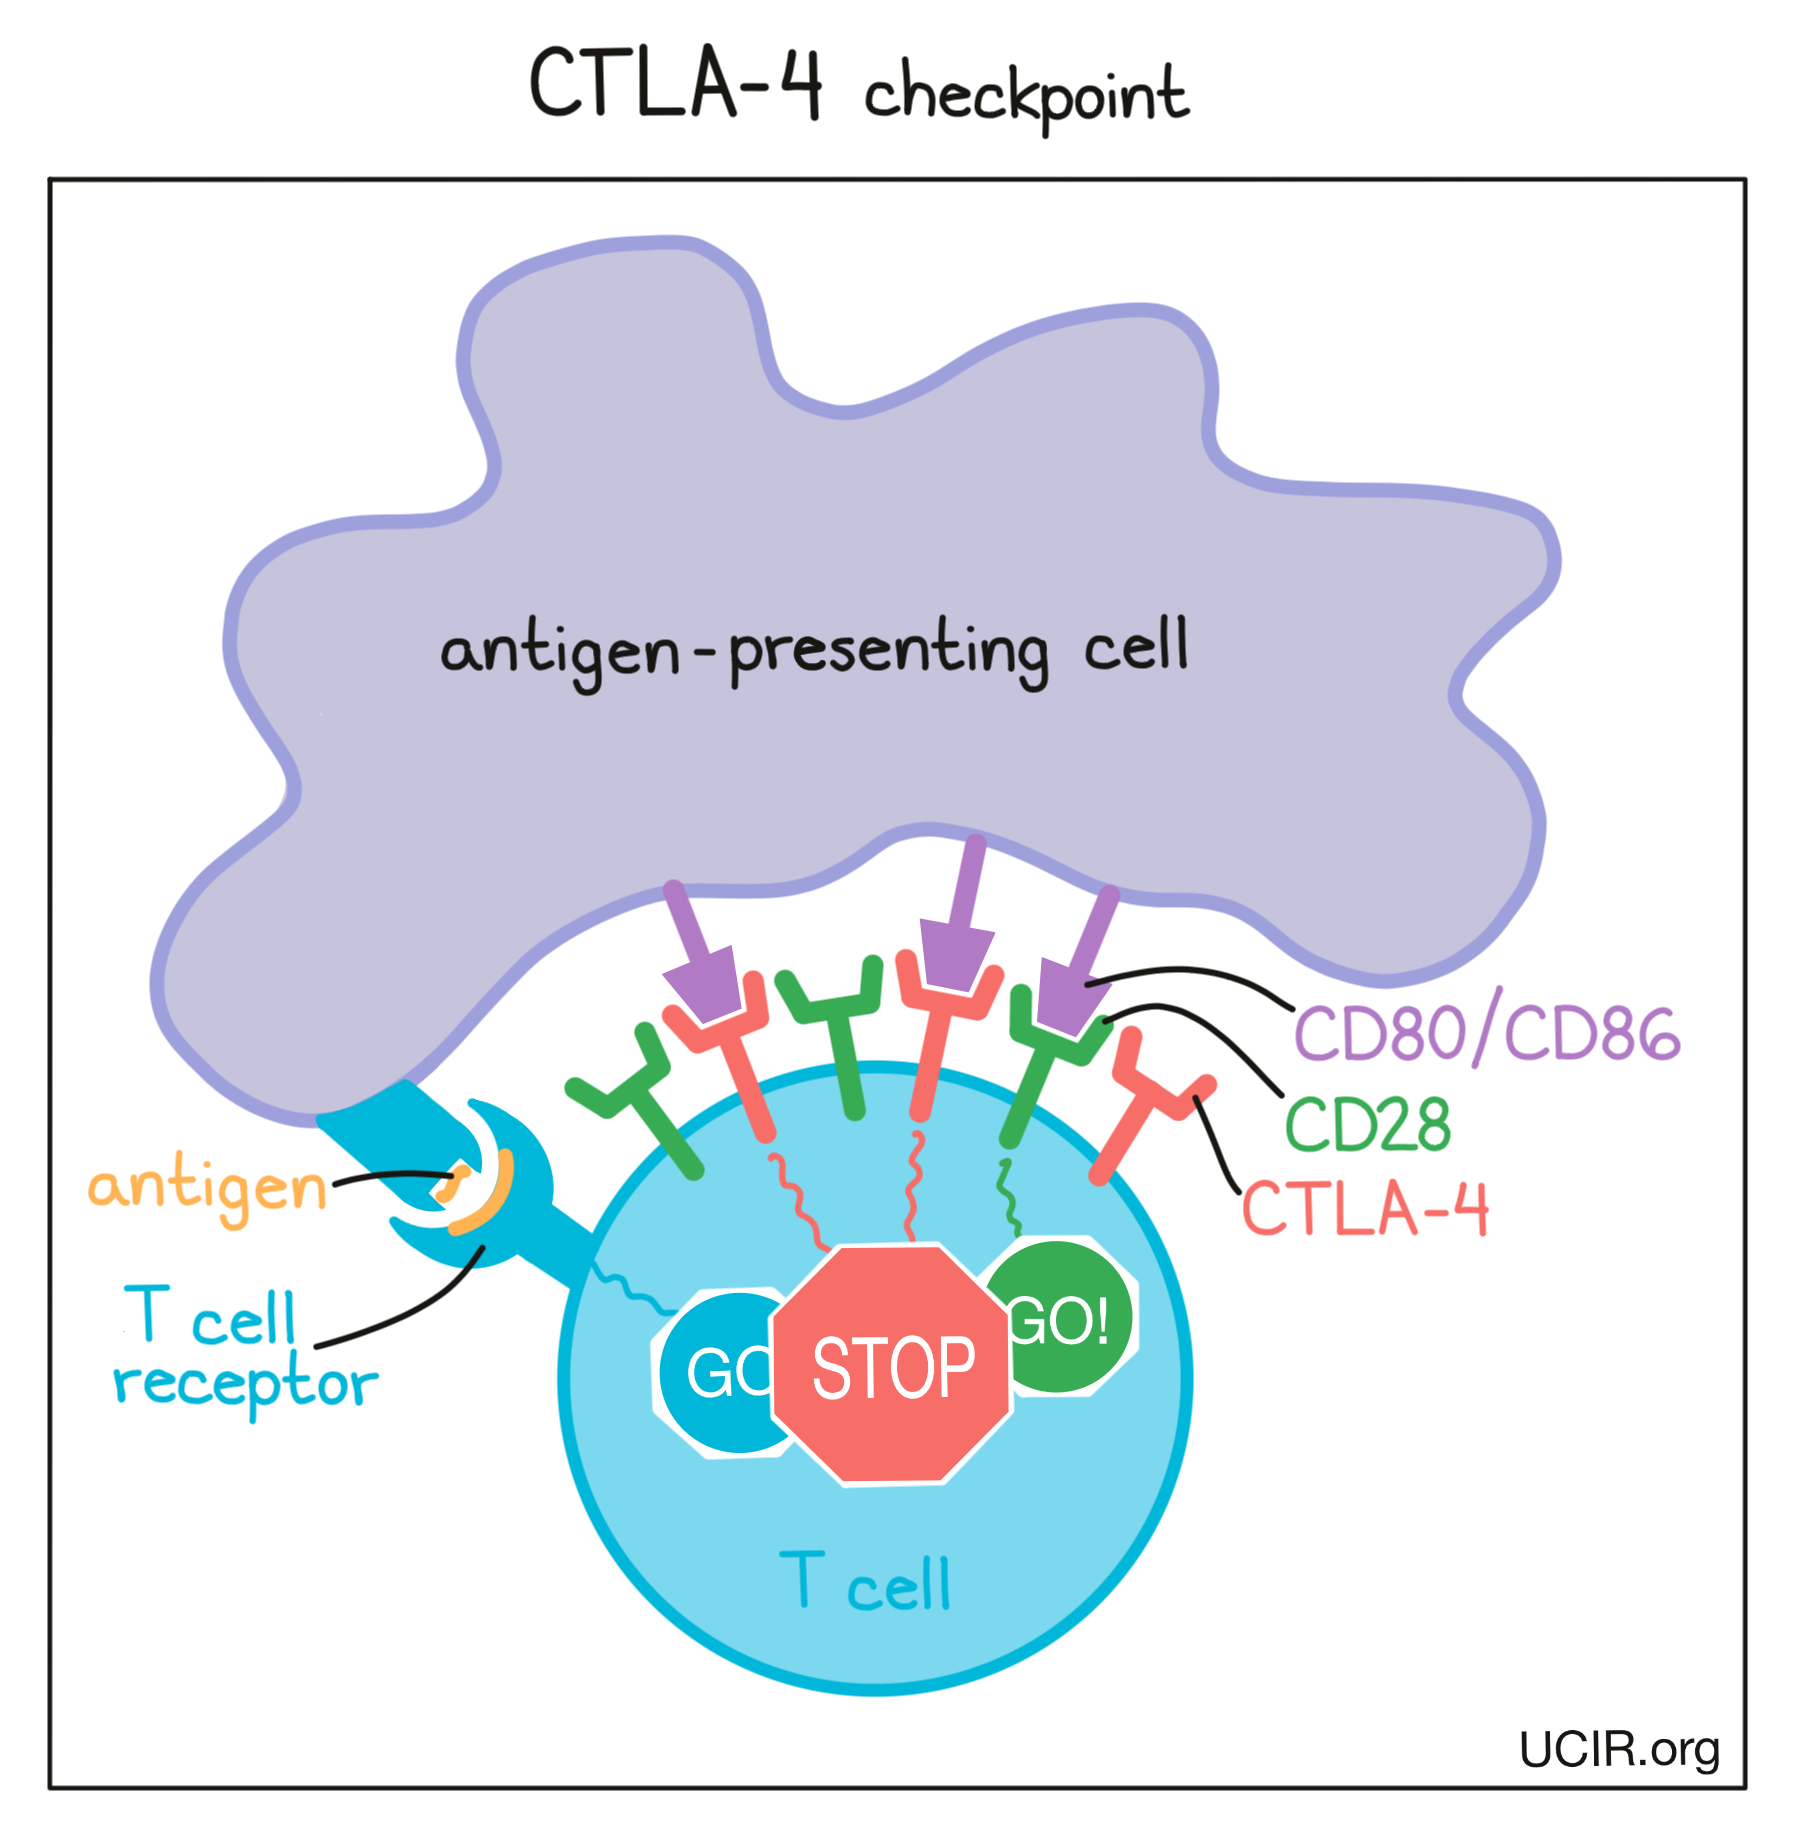  Illustration that shows how CTLA-4 checkpoint works (multiple images)